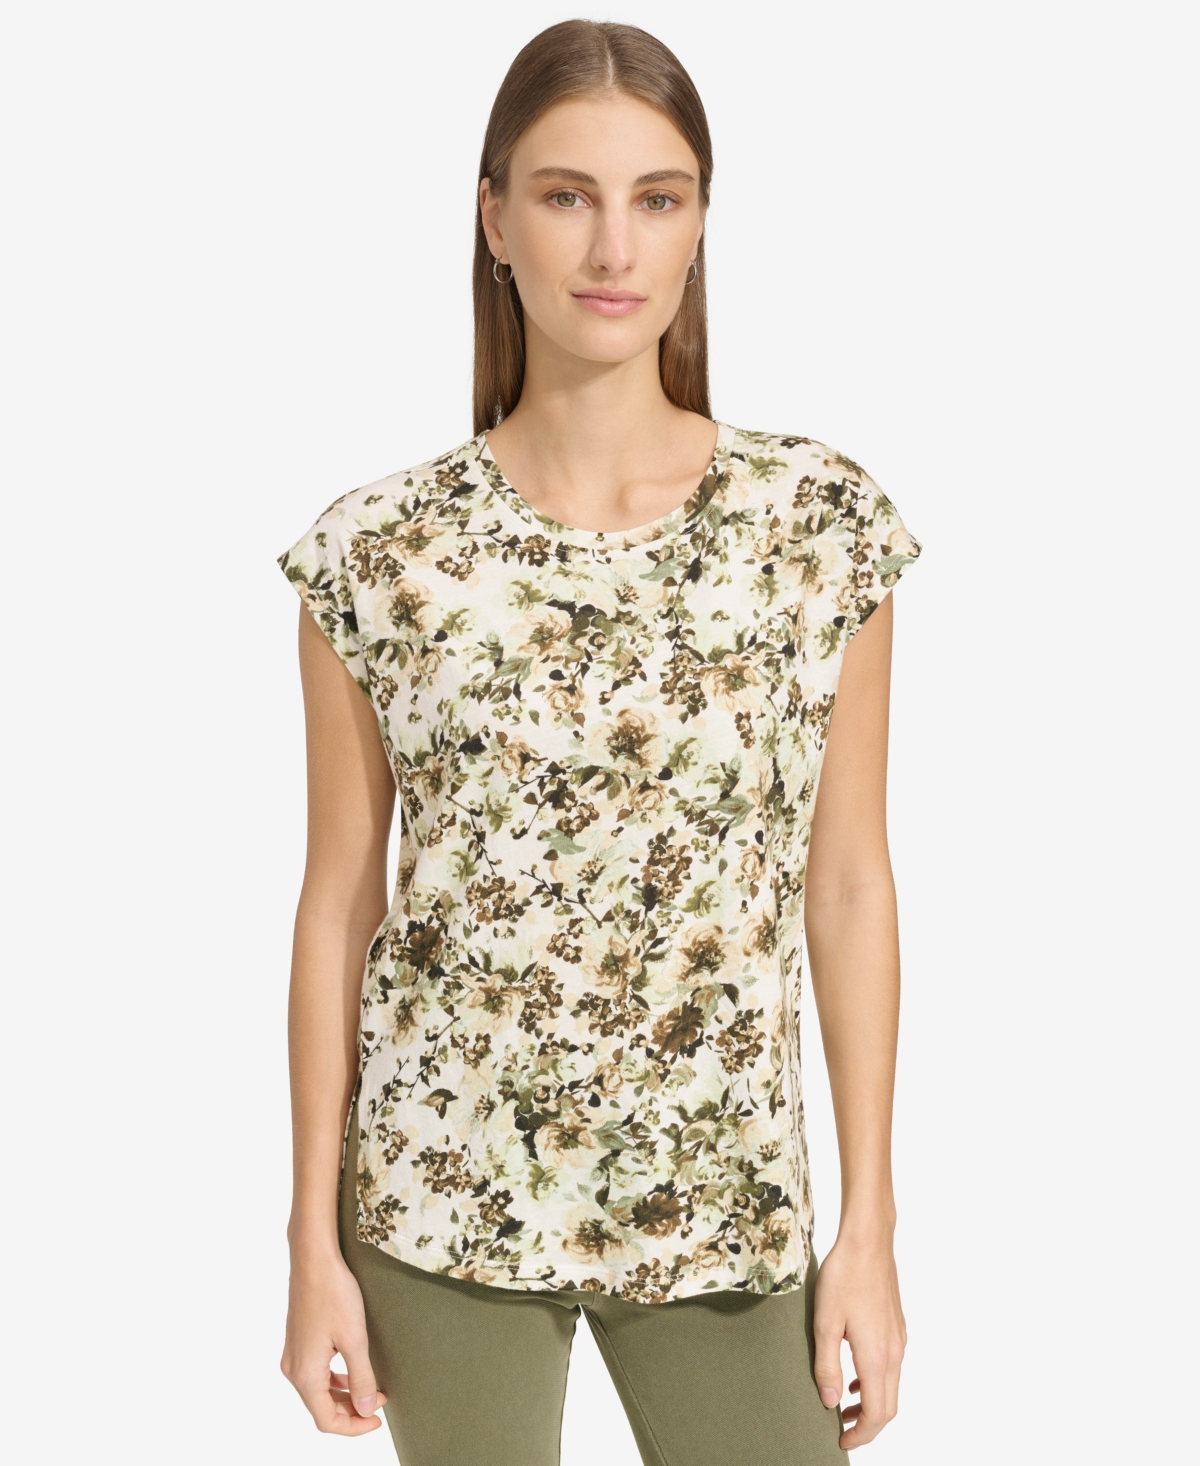 Andrew Marc Sport Women's Cotton Dolman-Sleeve Tee - Forest Green Mixed Floral